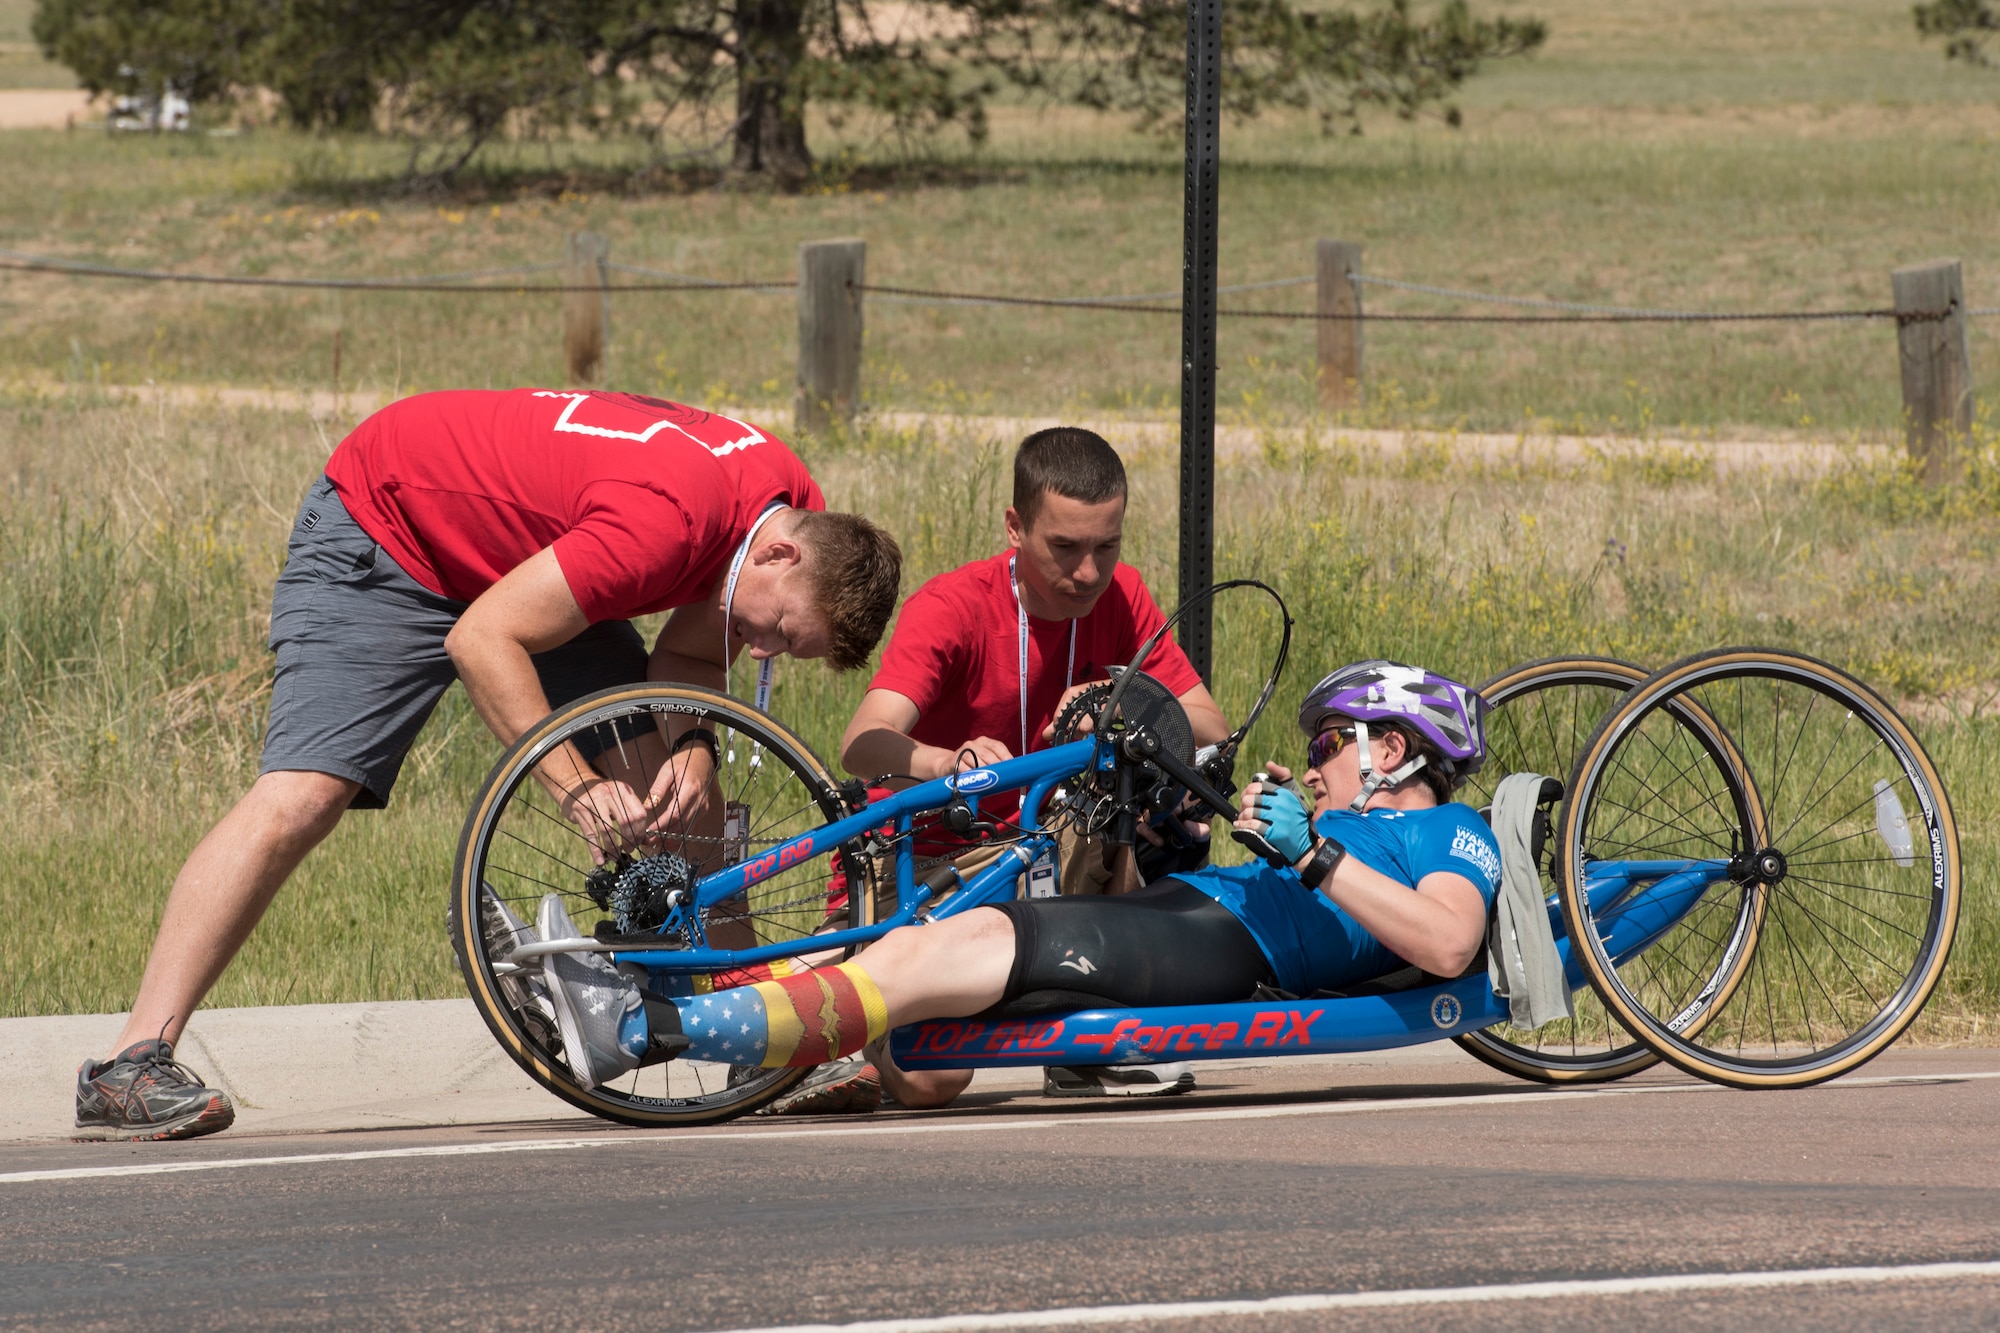 Master Sgt. Lisa Goad, Team Air Force athlete, observes as her bike is fixed after a crash during a hand-cycling race as part of the 2018 DoD Warrior Games at the U.S. Air Force Academy in Colorado Springs, Colo. on June 6. The Warrior Games are an annual event, established in 2010, to introduce wounded, ill and injured service members to adaptive sports as a way to enhance their recovery and rehabilitation. (DoD Photo by Roger L. Wollenberg)